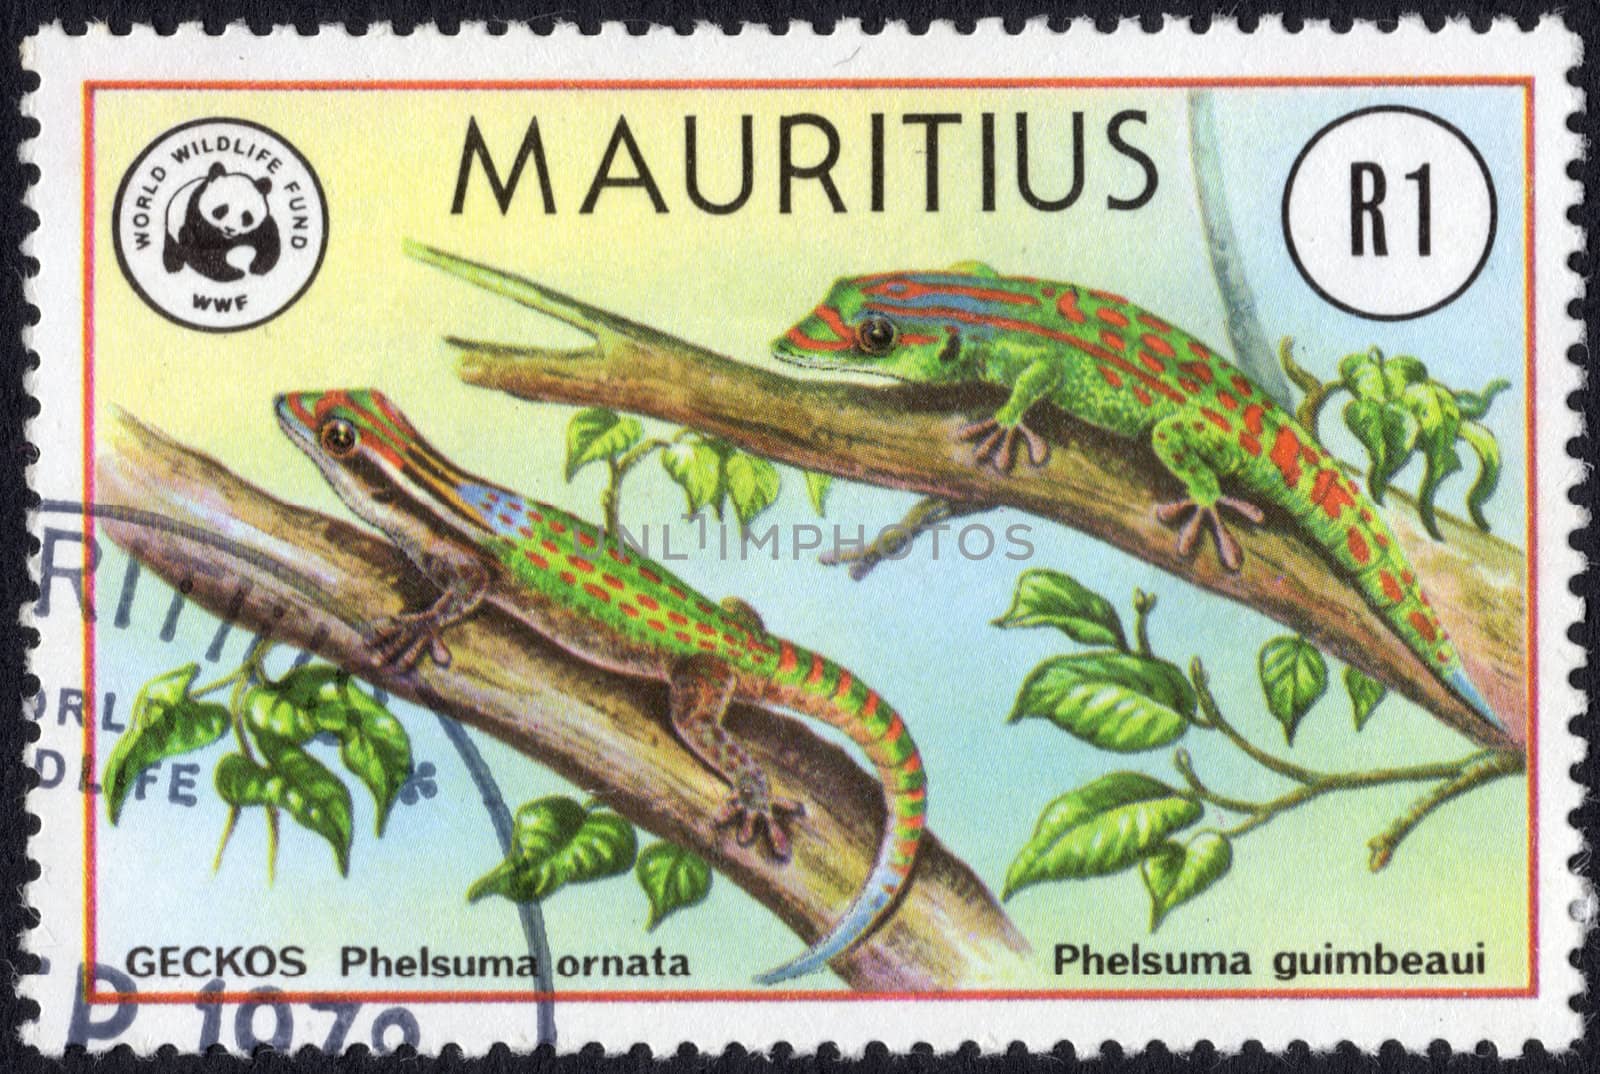 A Stamp from Mauritius showing Two Geckos by d40xboy